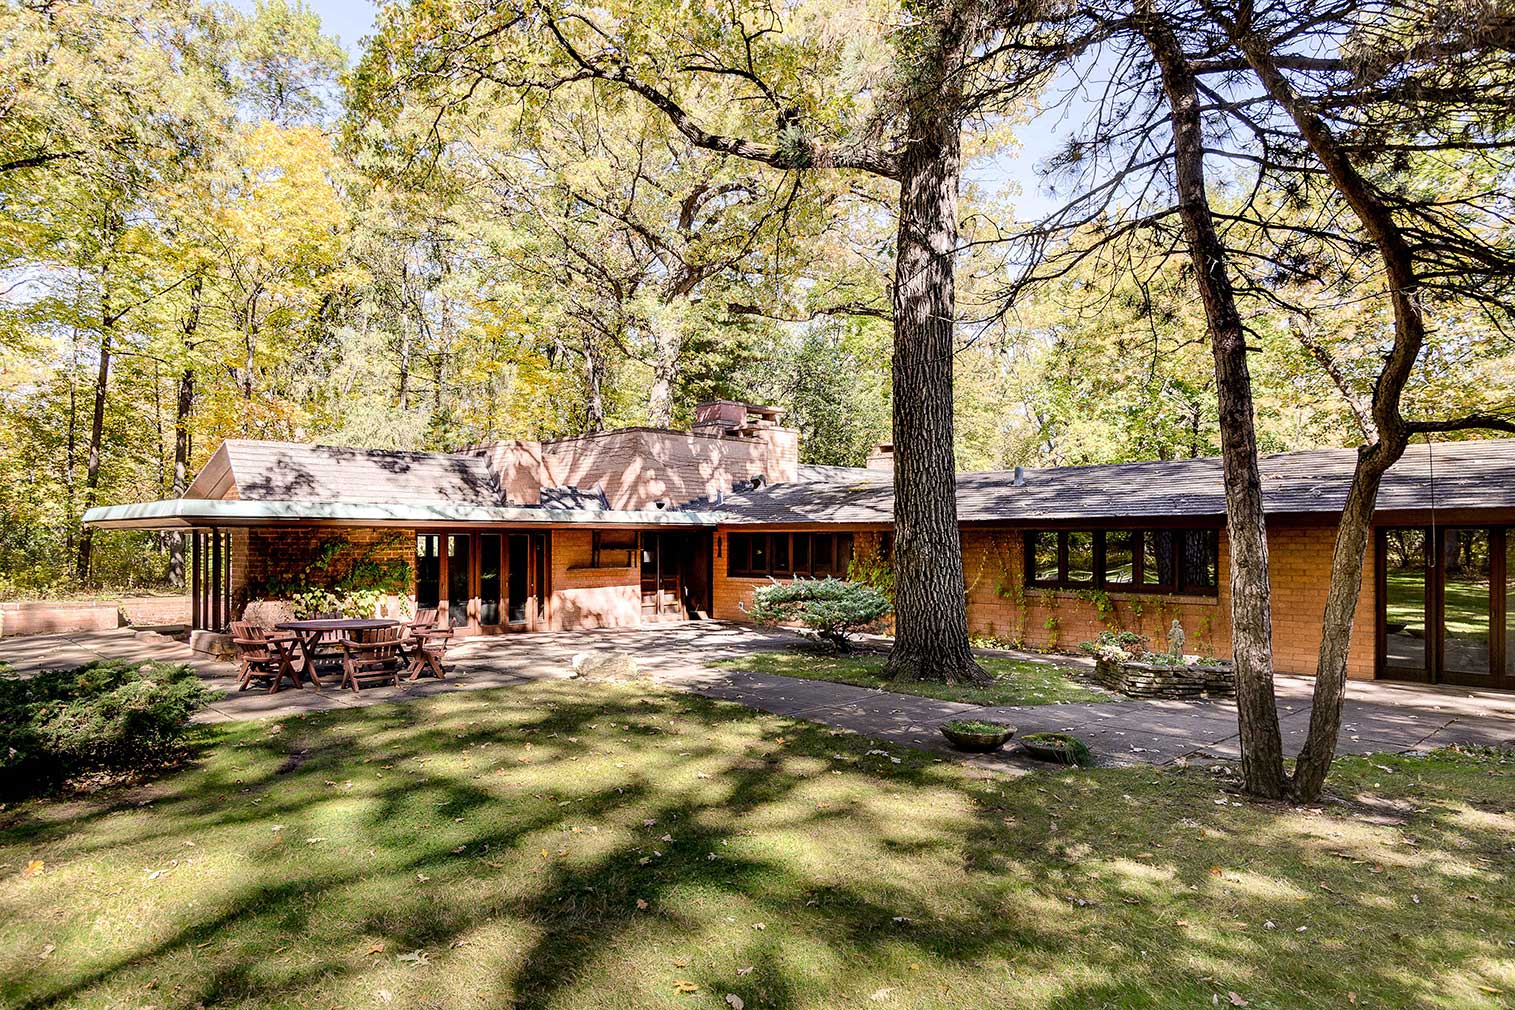 The John Carr Residence in Glenview, Illinois is for sale